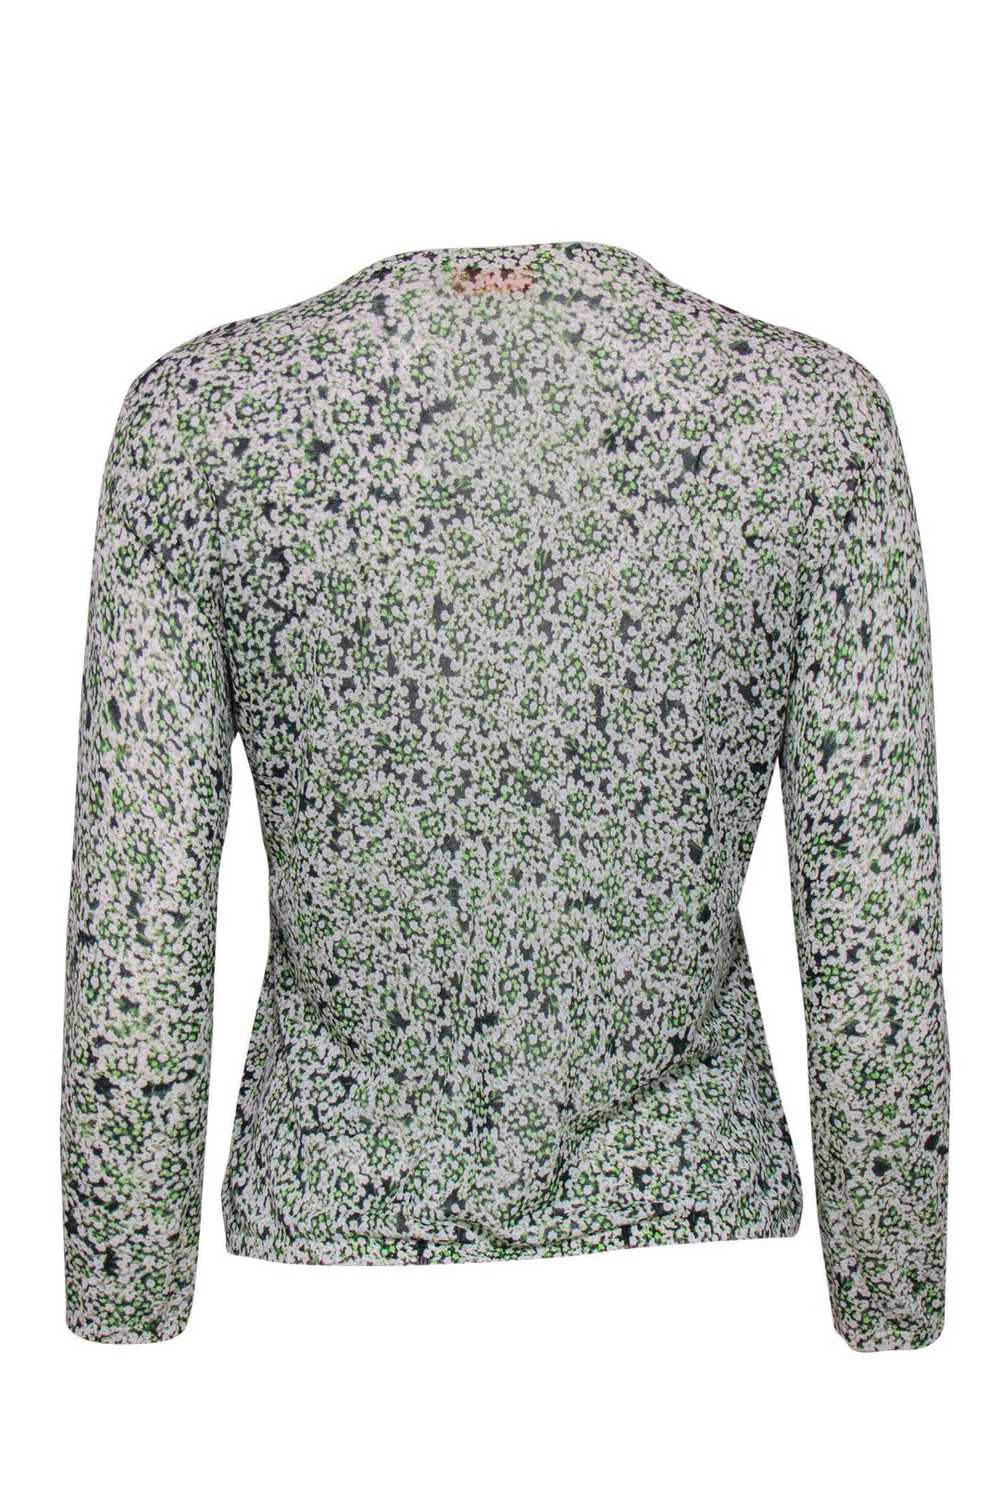 Tory Burch - White & Green Floral Printed Cardiga… - image 3